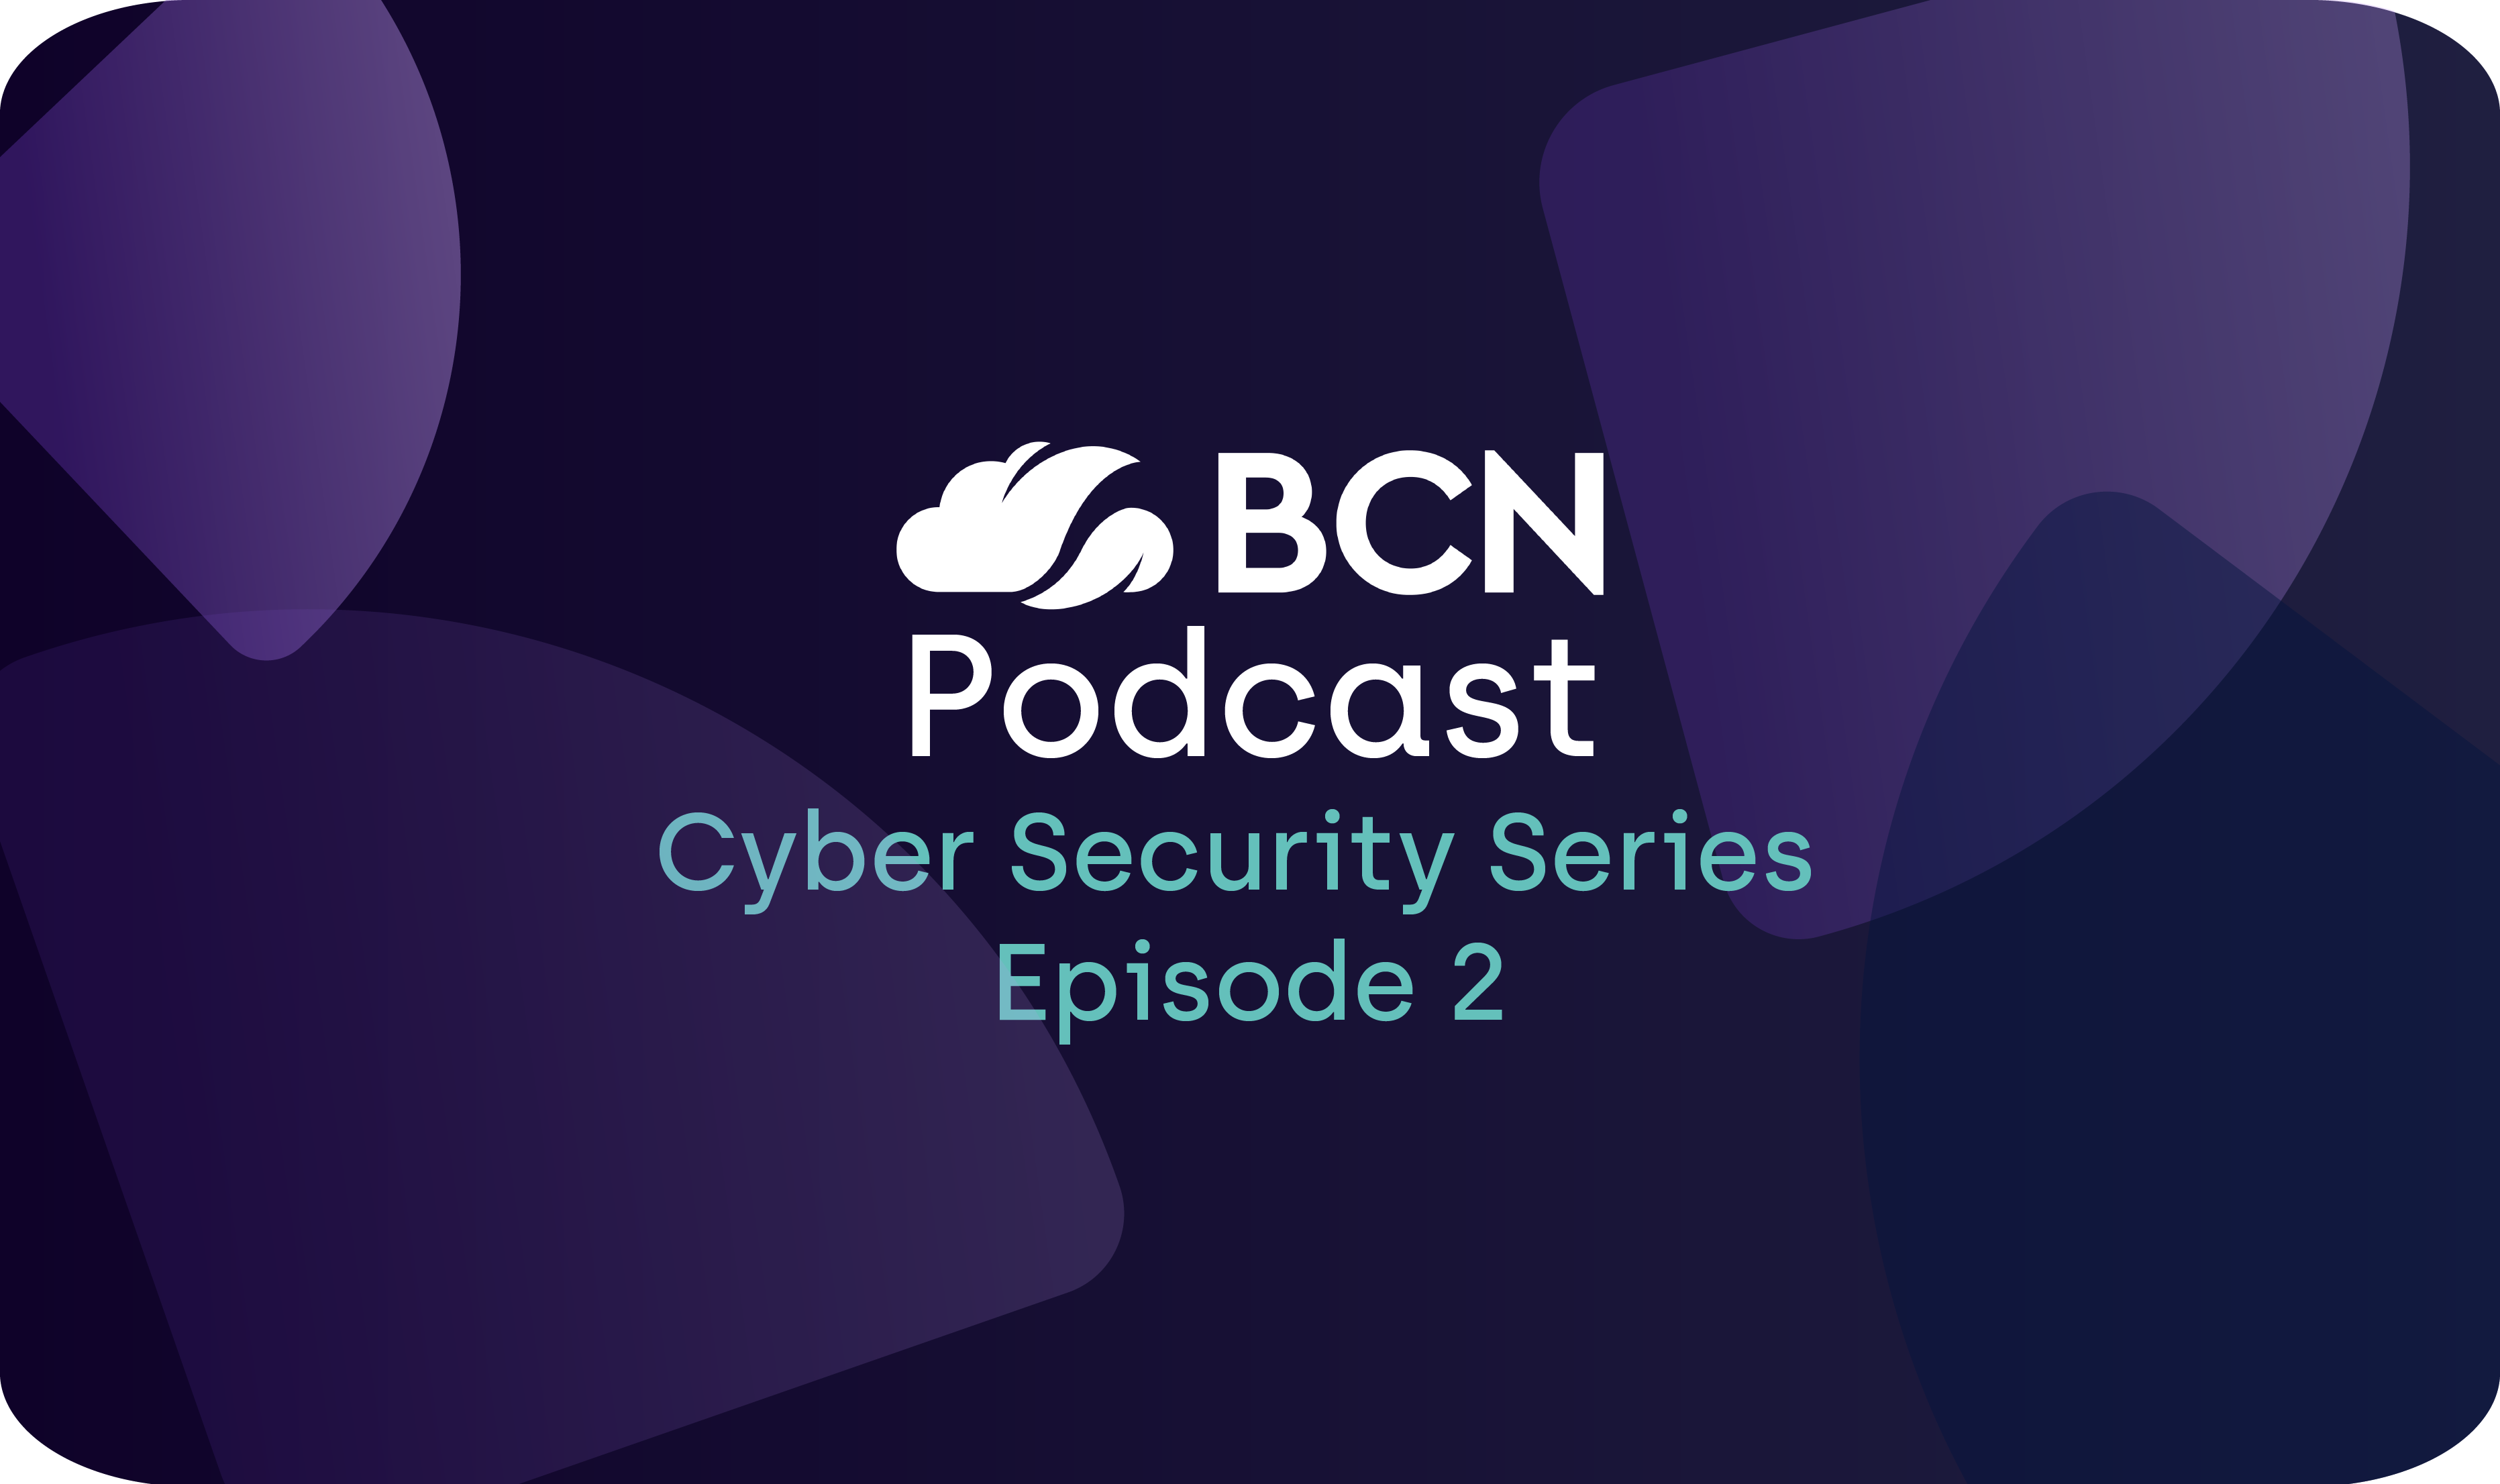 BCN Podcast: Cyber Security Series, episode 2